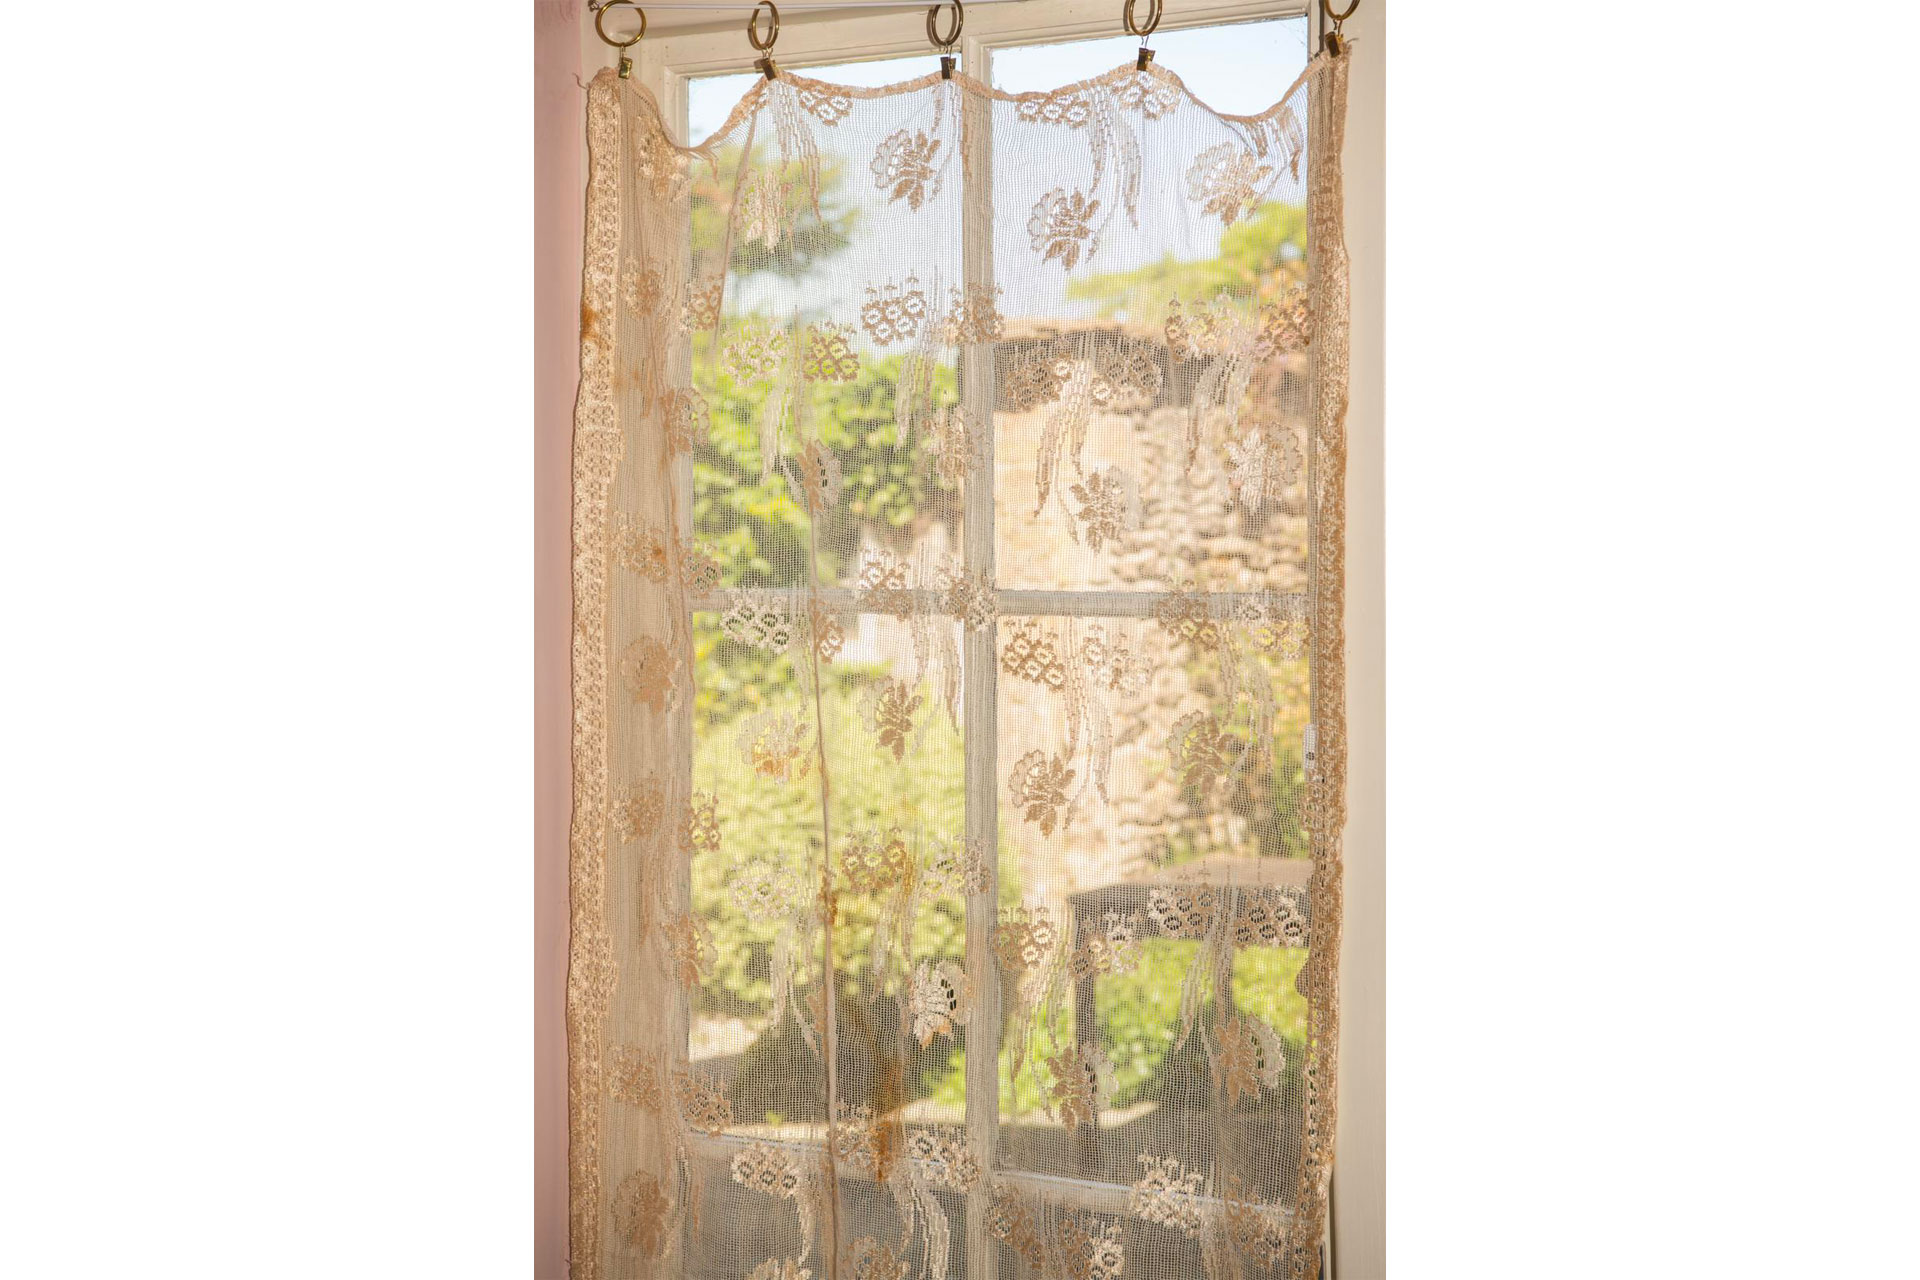 Pearl Lowe's vintage lace curtains